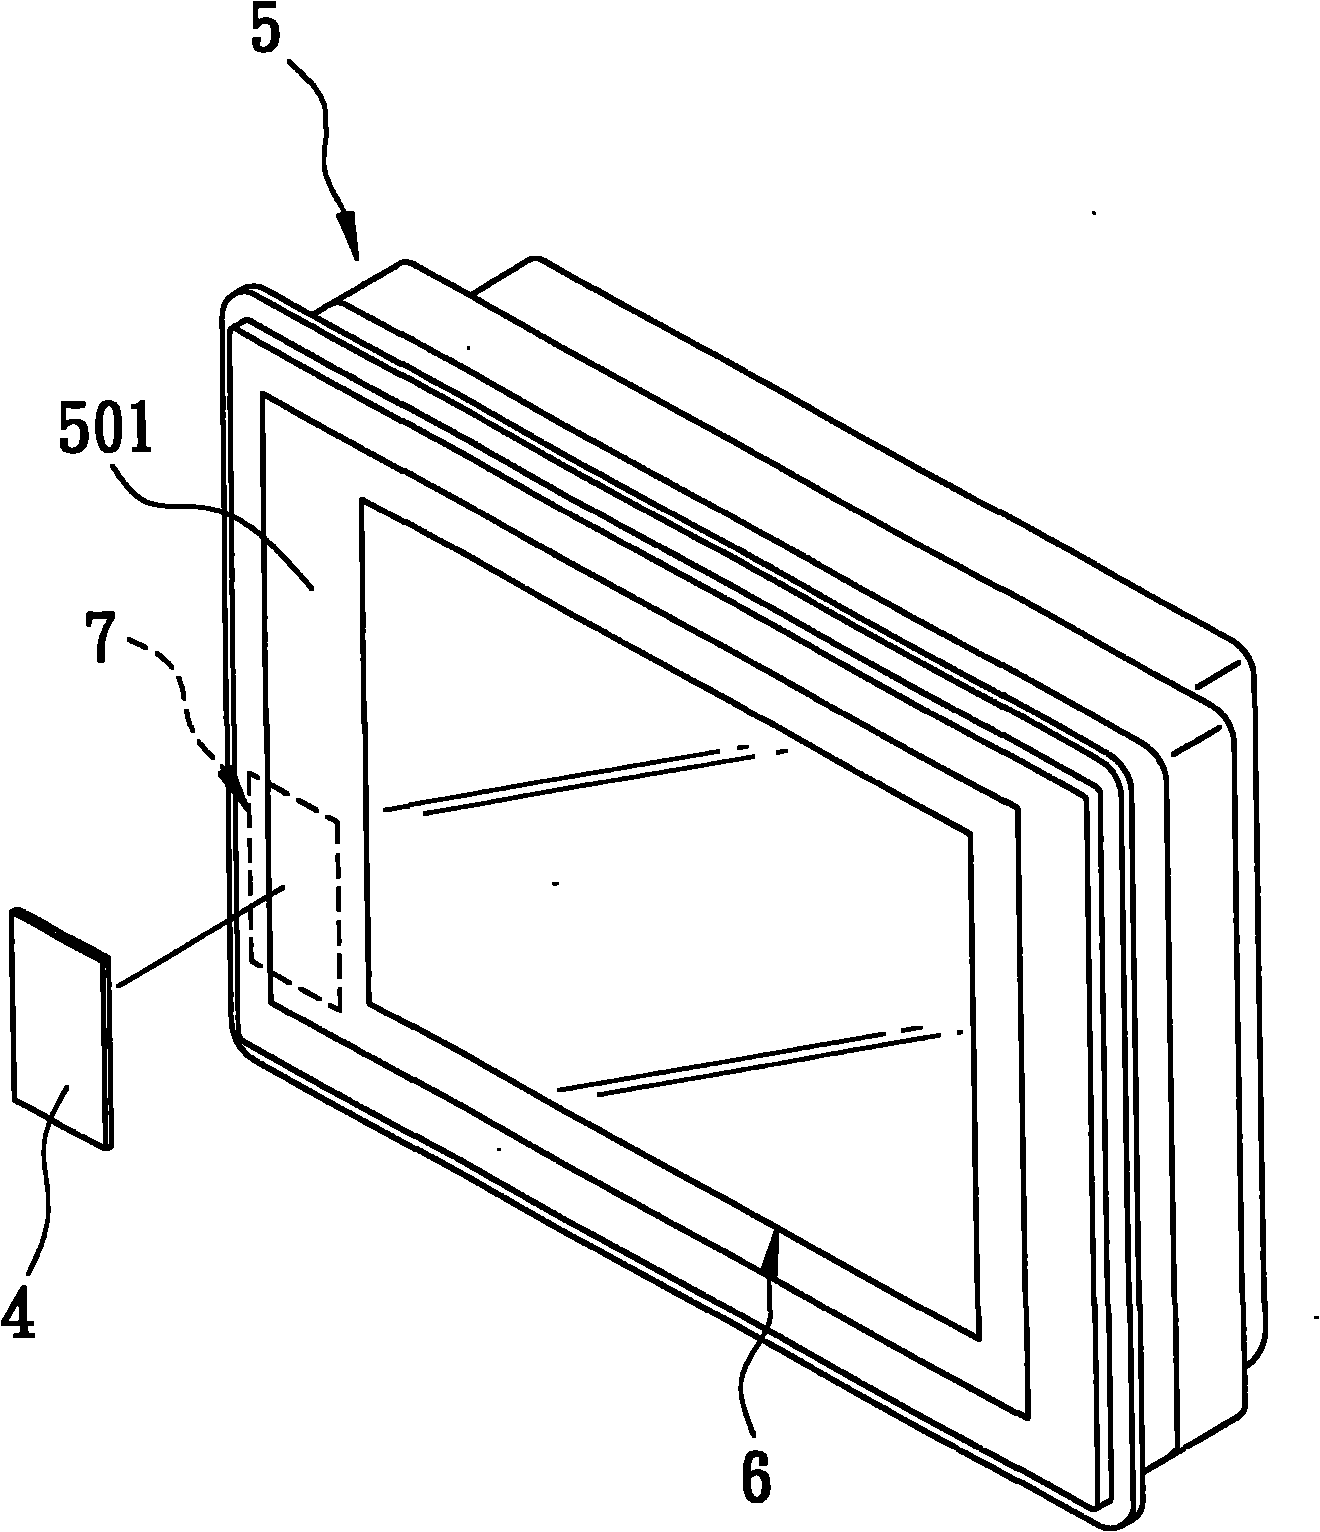 Hand-held electronic device